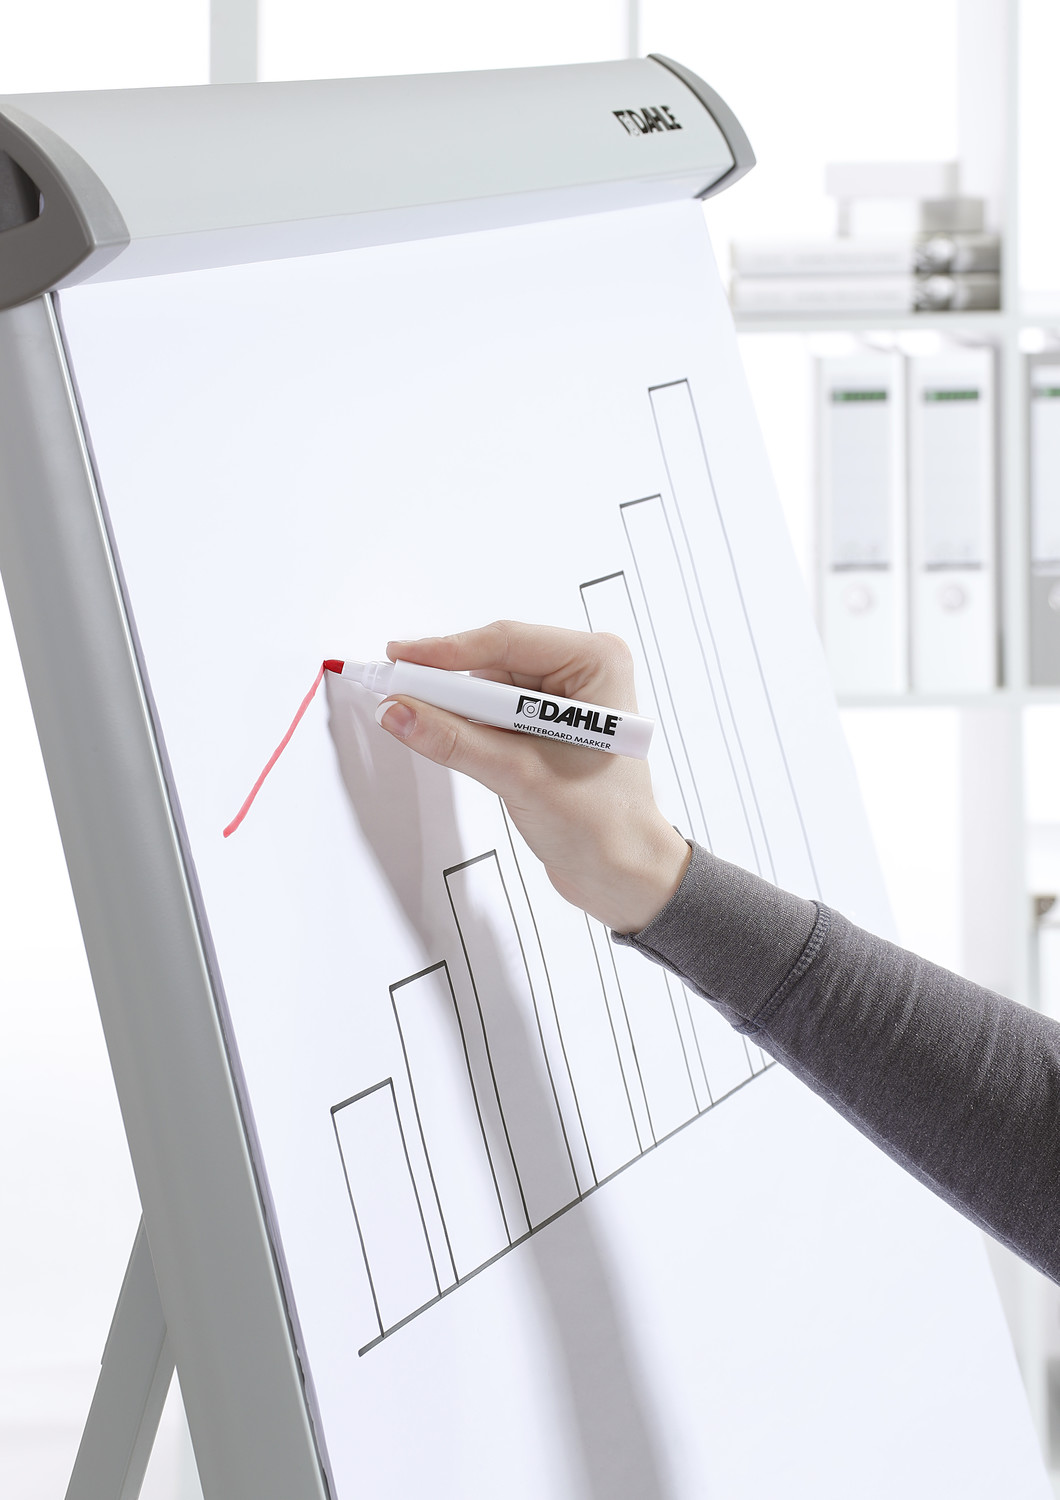 Take notes, create drafts, structure information – flip charts by Dahle are the perfect choice for interactive meetings and presentations